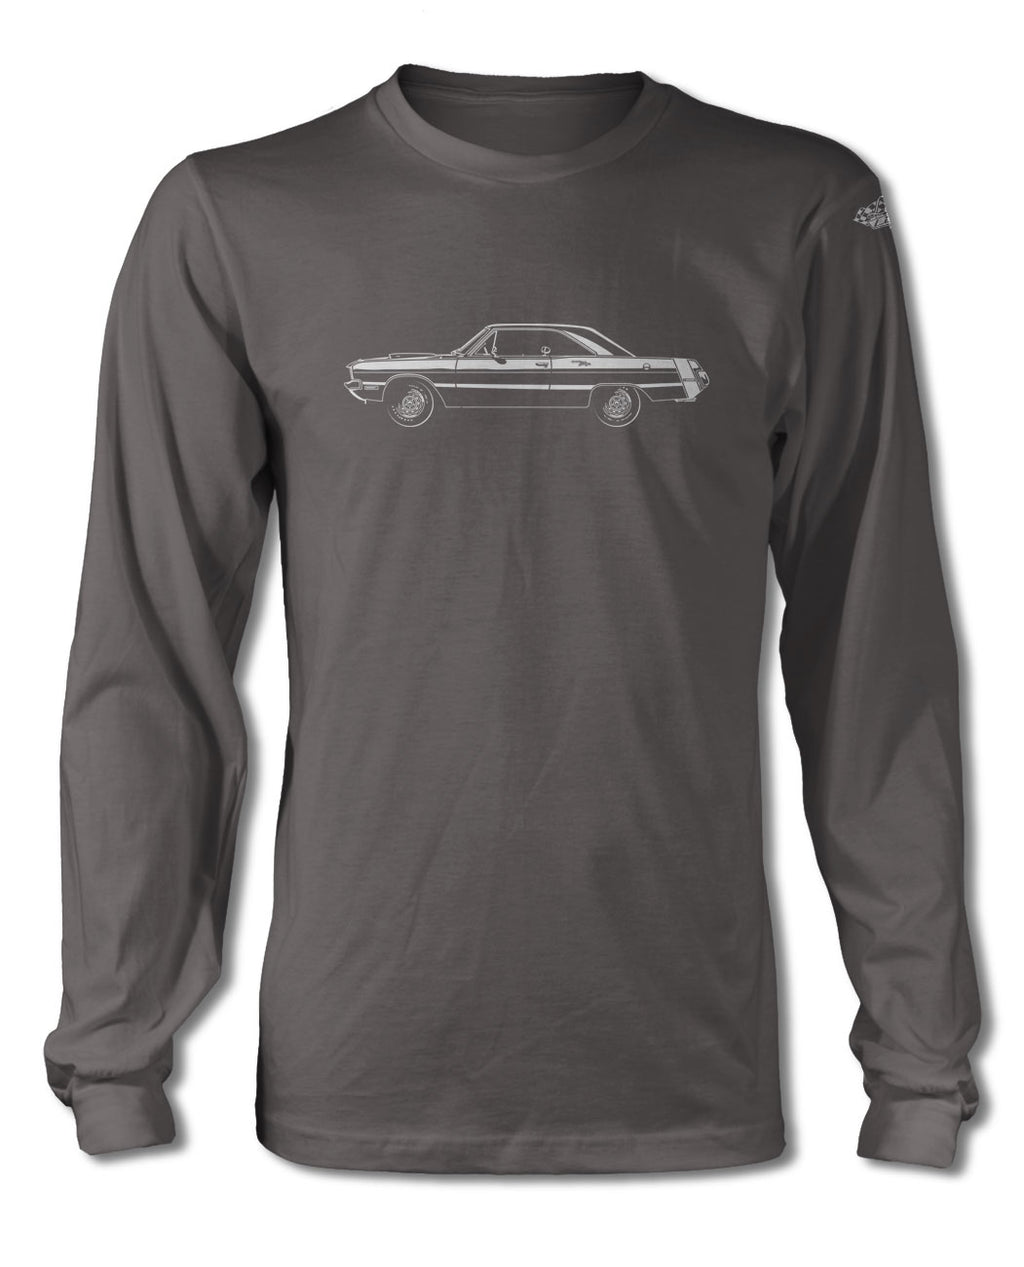 1970 Dodge Dart Swinger Coupe T-Shirt - Long Sleeves - Side View